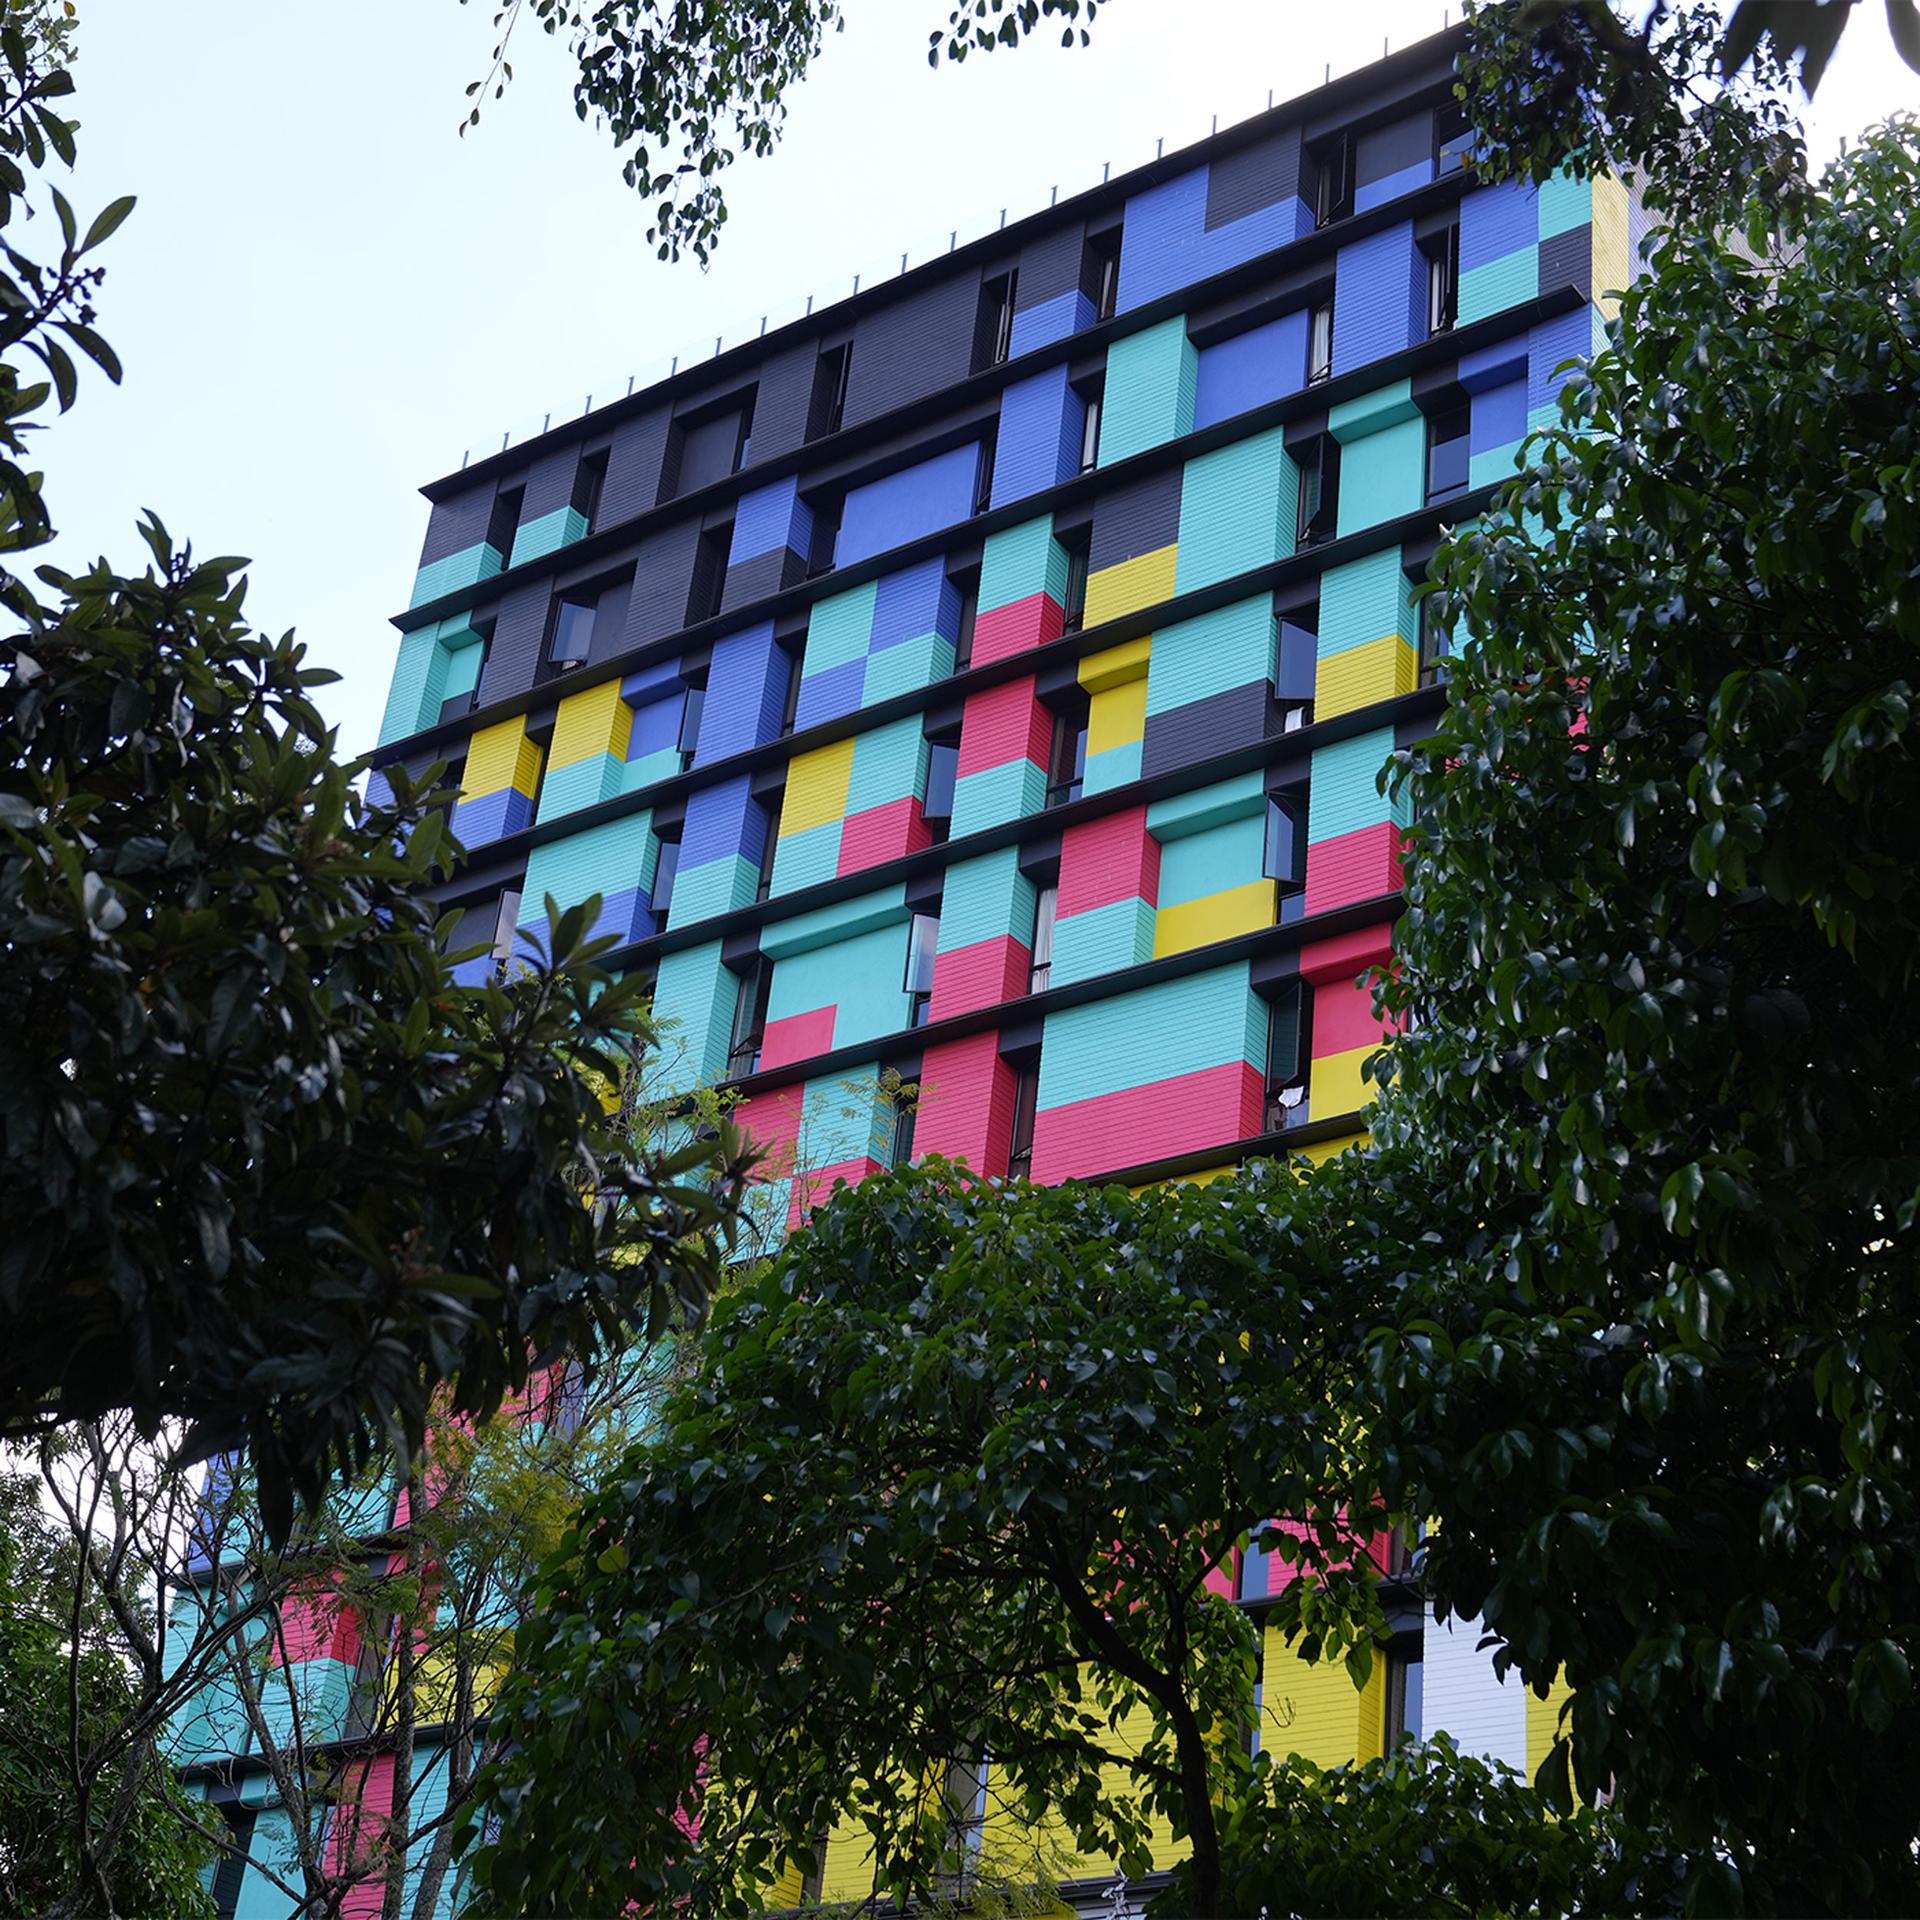 A new building in Laureles functions as a co-living and co-working space, and is set up mostly for short-term rentals.